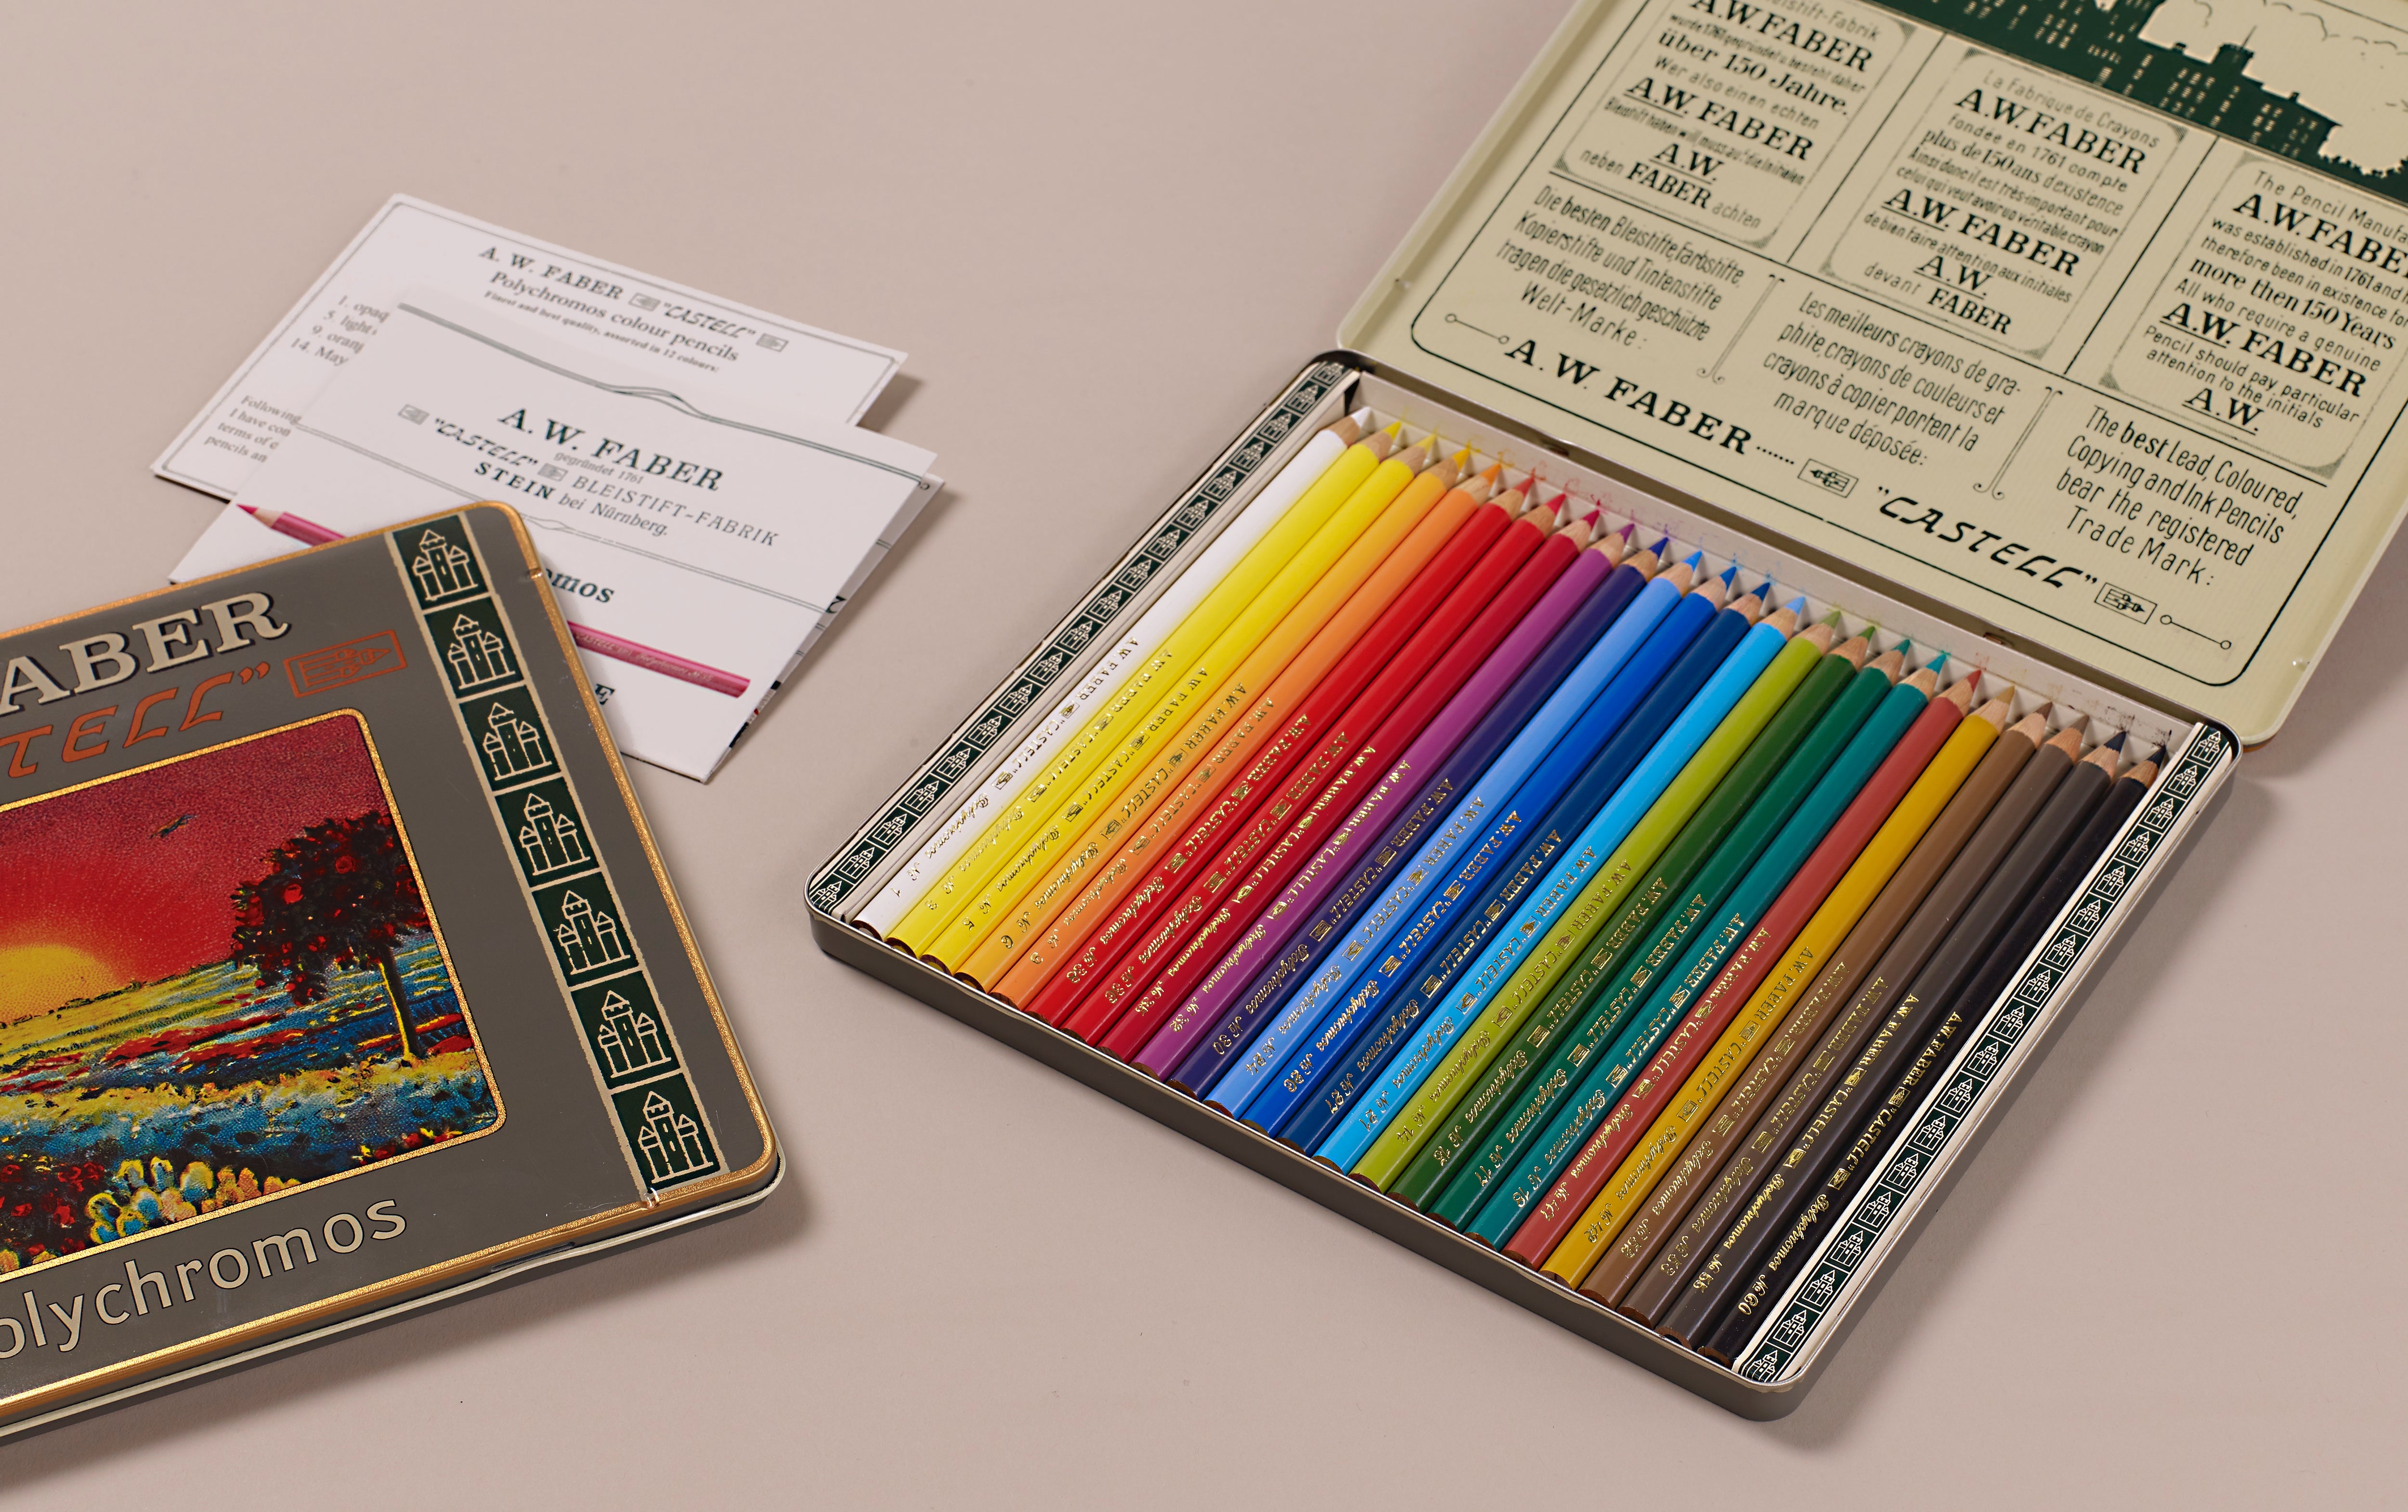 Special Edition "111 Years Of Colour" Polychromos Coloured Pencils